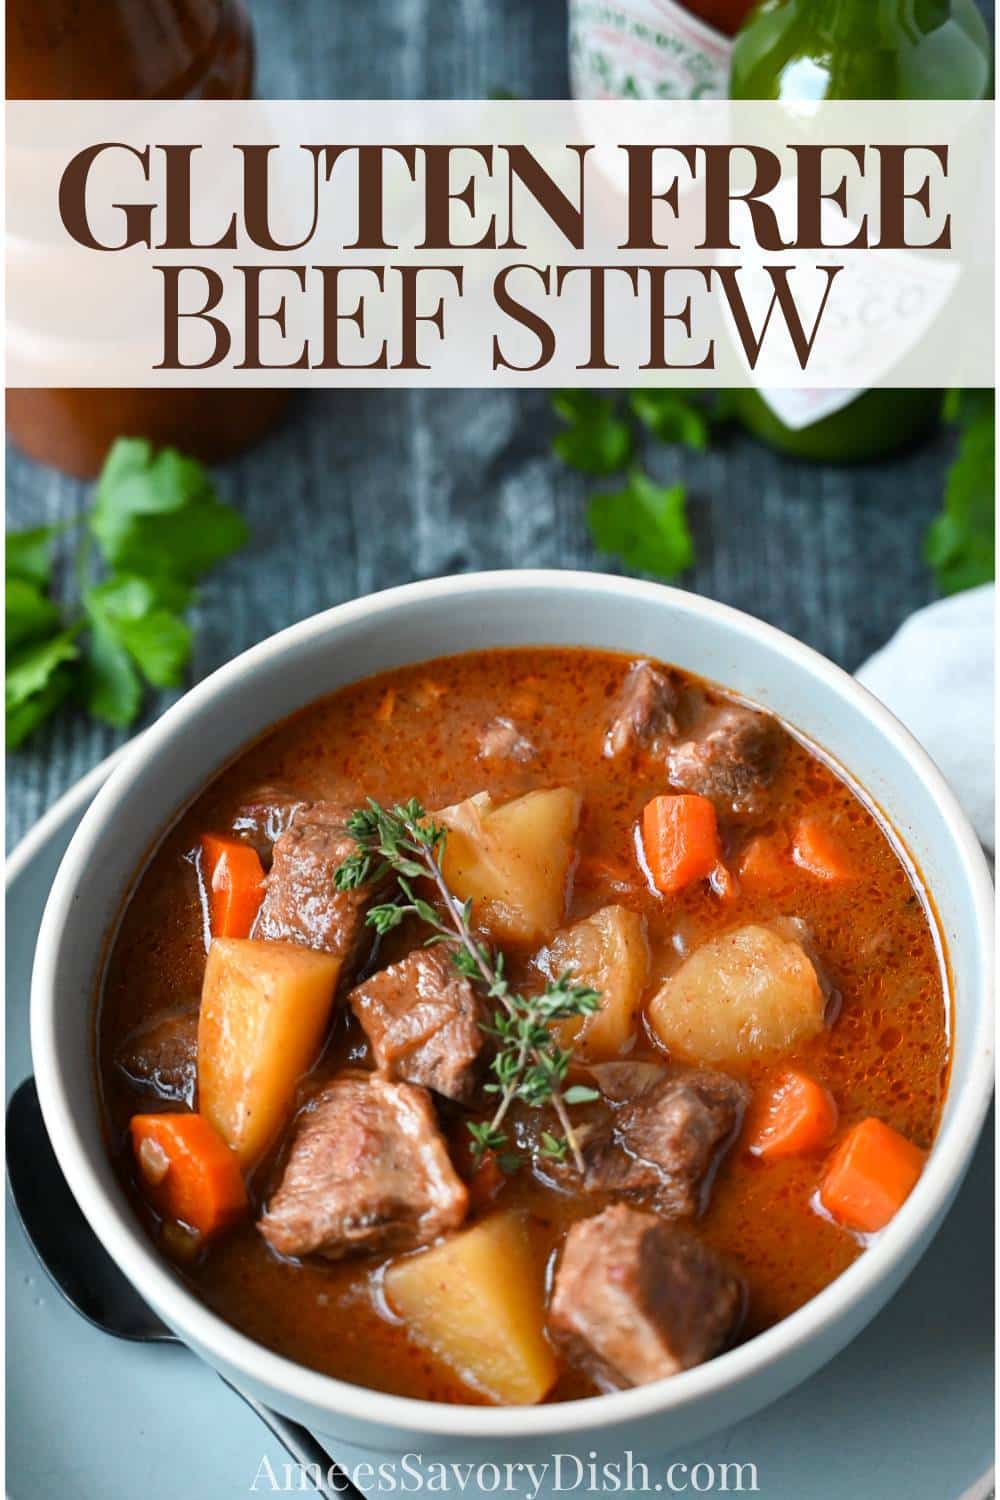 This Gluten Free Beef Stew is the best dump-and-go dinner! Cooked low and slow resulting in a hearty and DELICIOUS pot of classic beef stew. via @Ameessavorydish